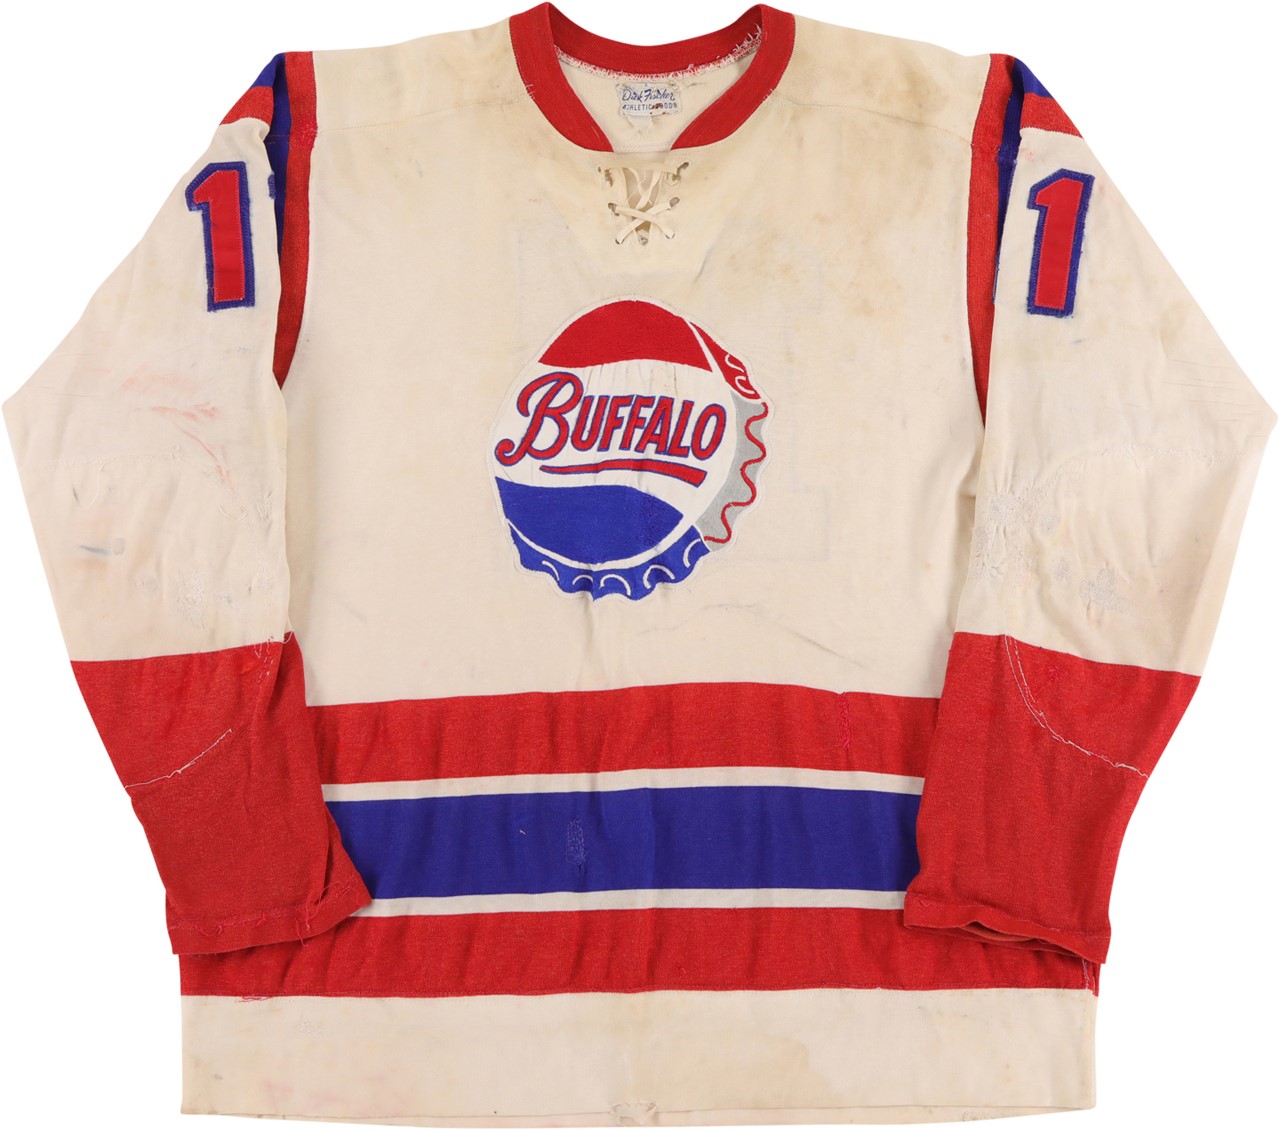 1960s Buffalo Bisons "Pepsi" Game Worn Jersey - Gil Perreault's Number 11!